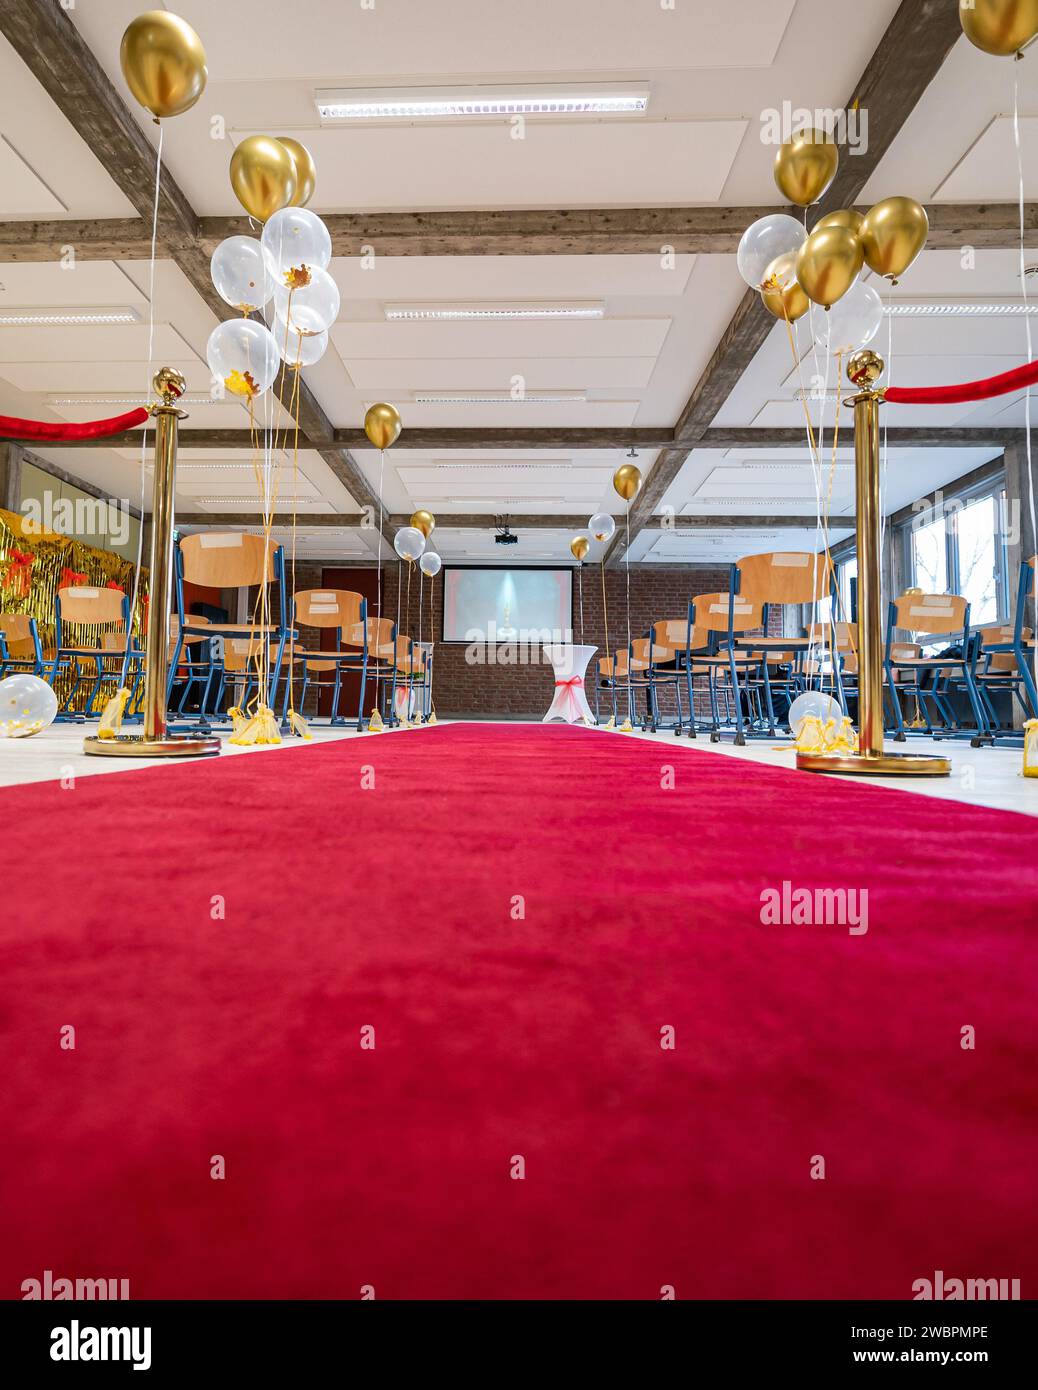 German Abitur Graduation party room decoration with Balloons and Award sculptures red carpet preparations for surprise party Stock Photo